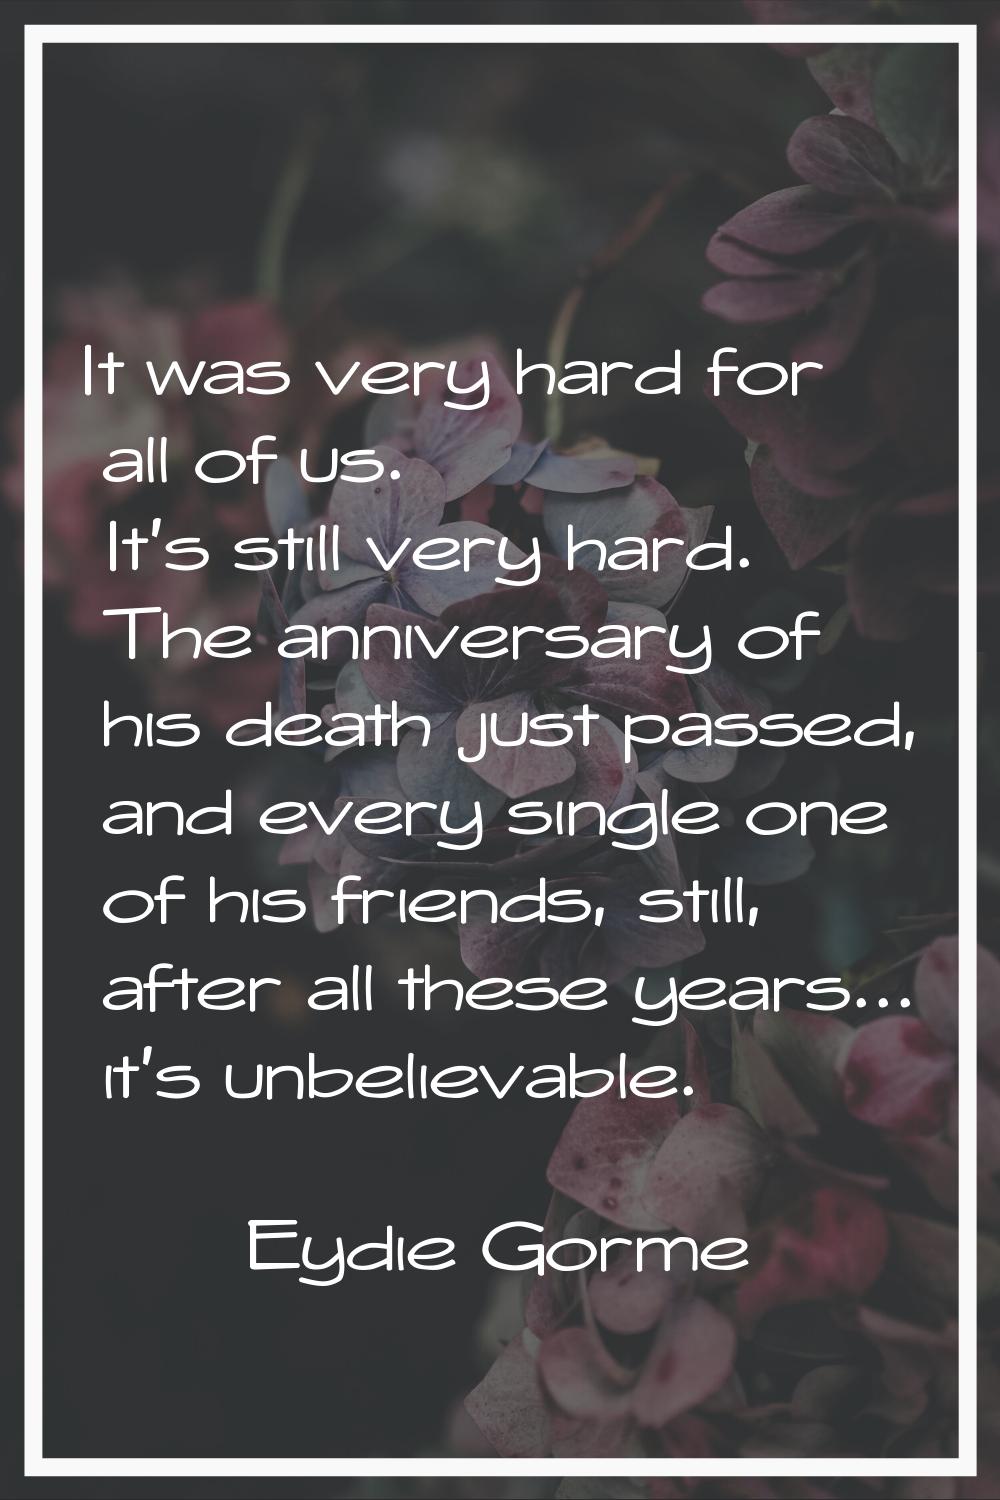 It was very hard for all of us. It's still very hard. The anniversary of his death just passed, and